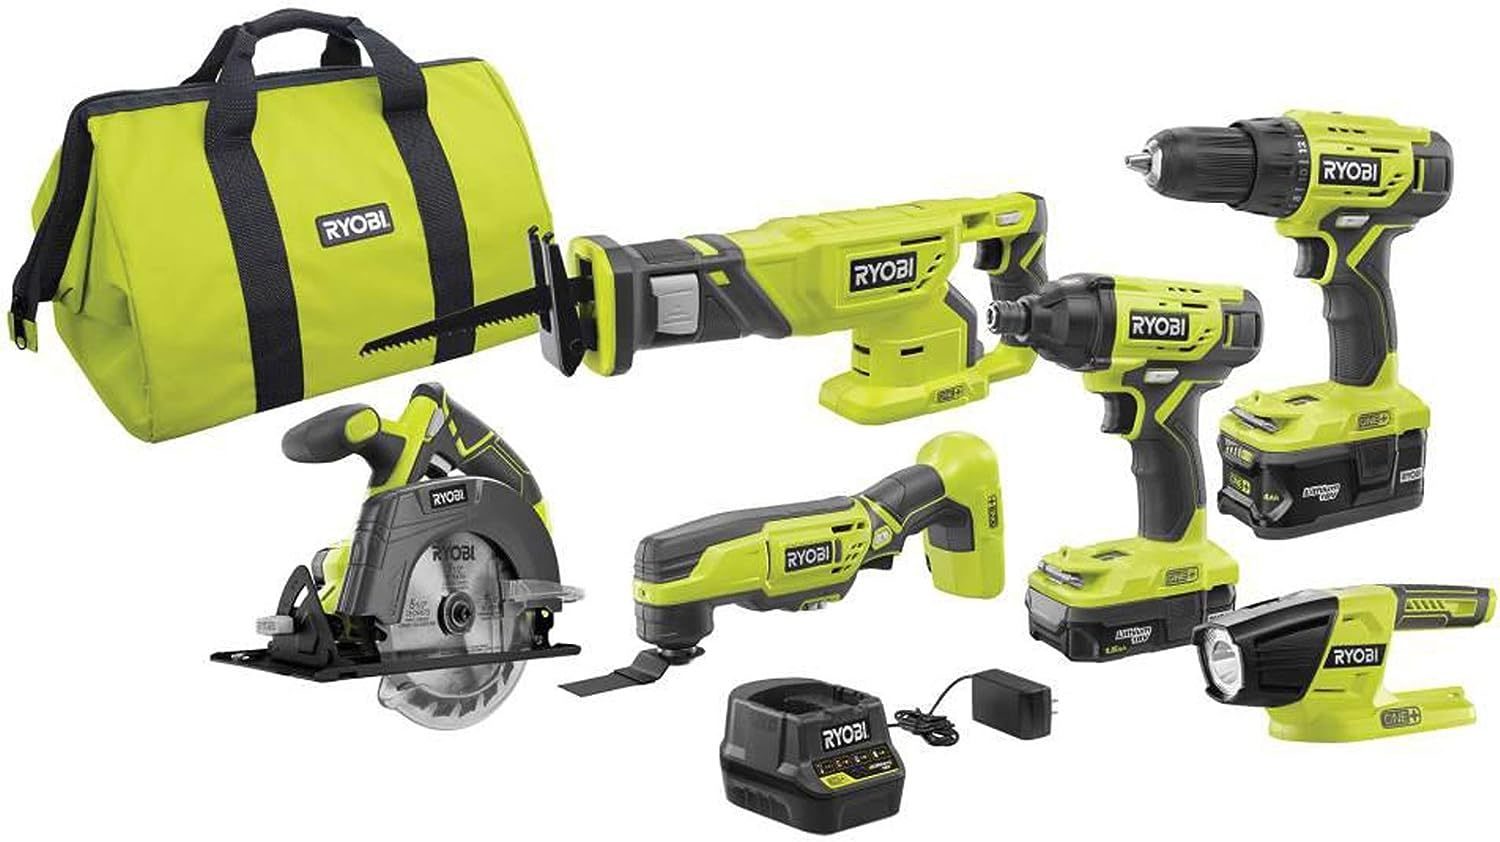 Primary image for Ryobi P1819 18V One Lithium Ion Combo Kit (6 Tools) Includes A, And Bag.